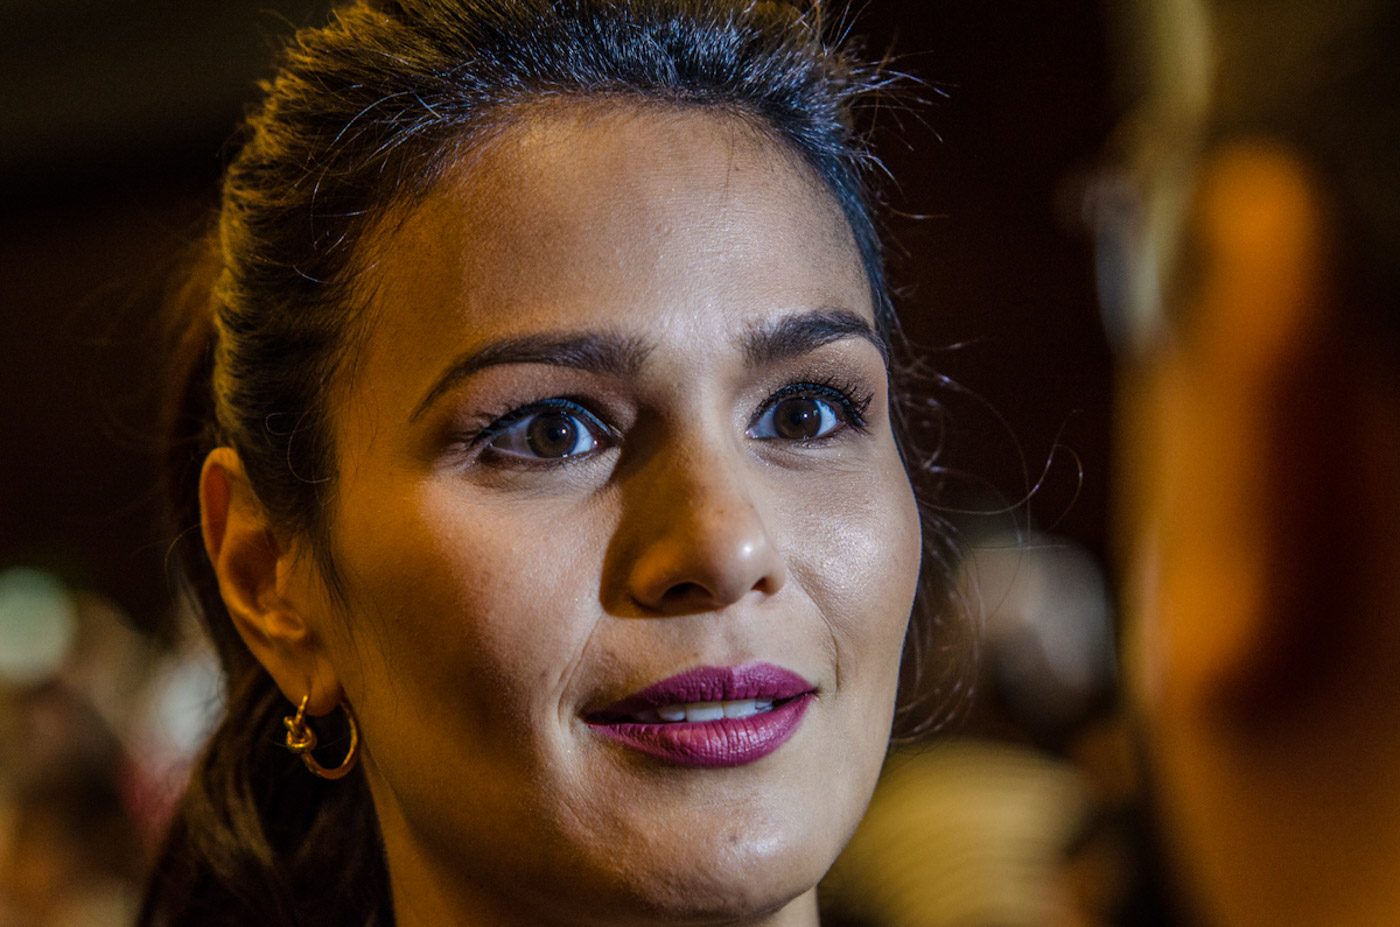 Iza Calzado open to kissing transgender actor in future projects